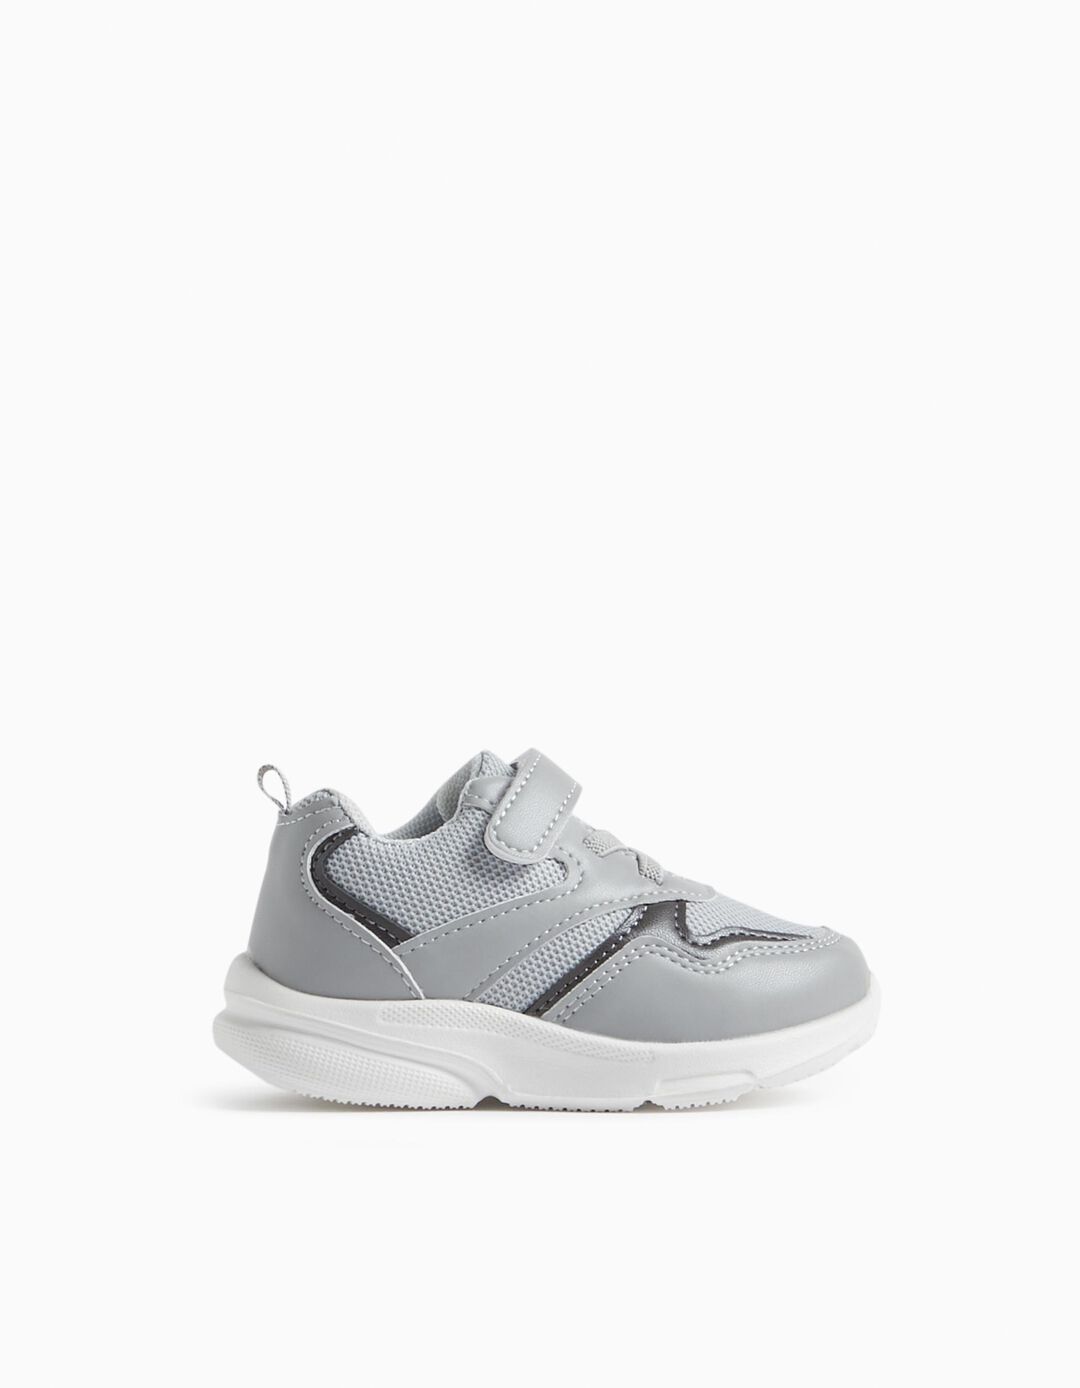 Sneakers, Baby Boy, Gray